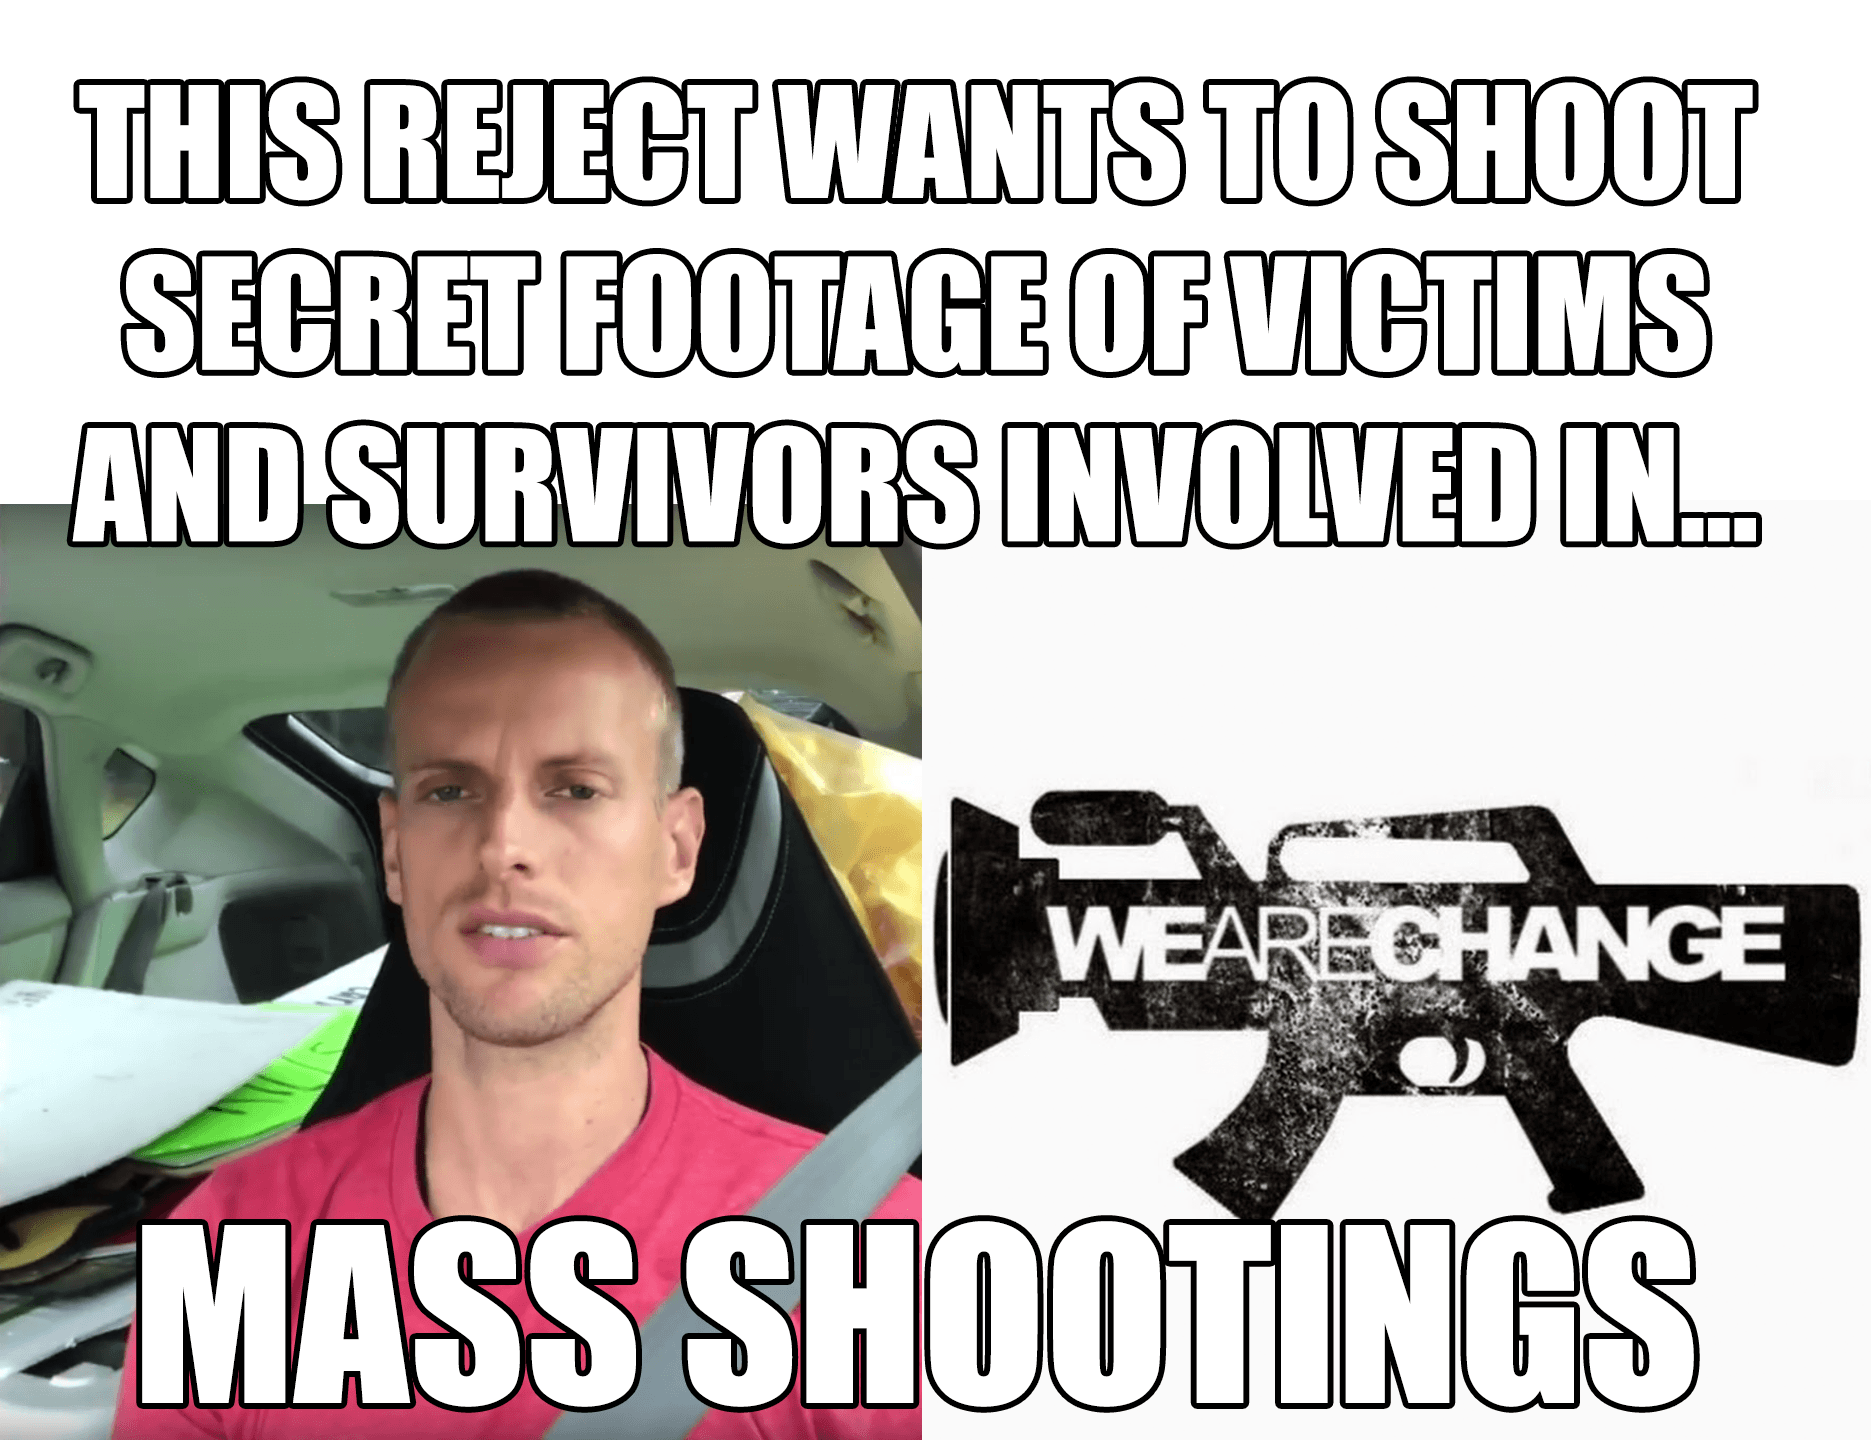 Would you allow this man to record a victim/survivors of mass shooting events?